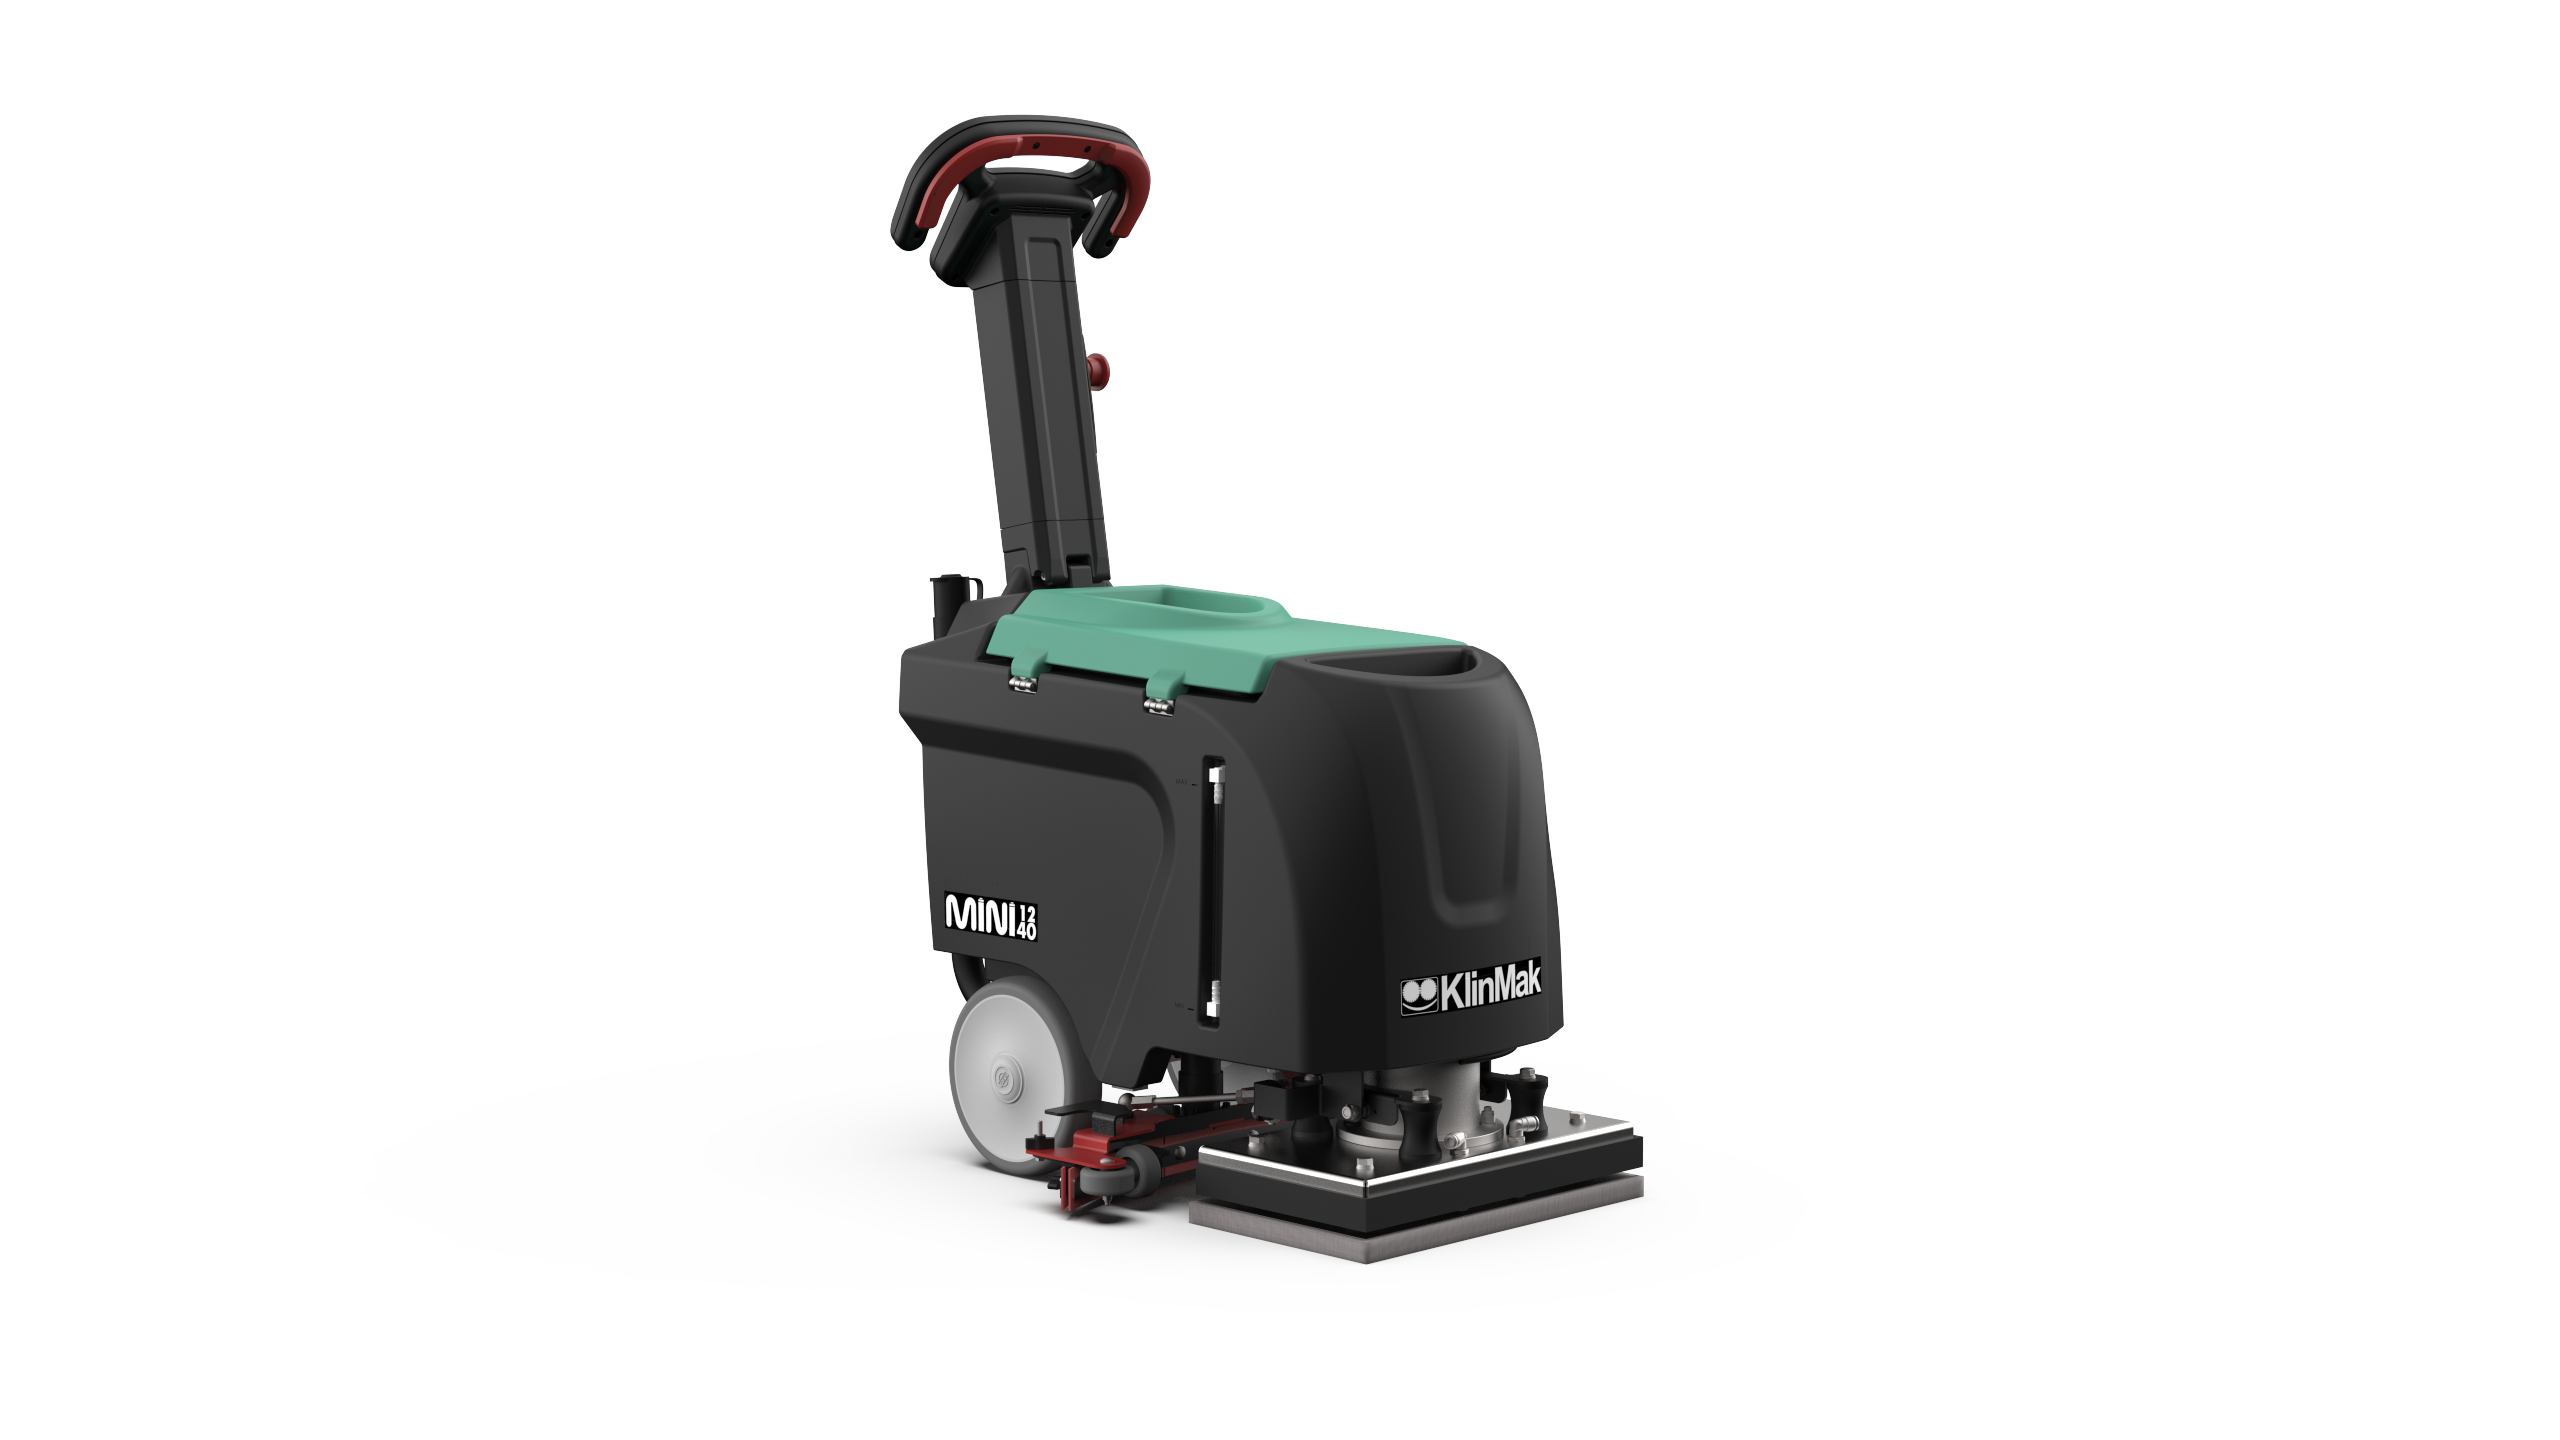 Cleaning talks about our new MINI HD 1240 scrubber-dryer